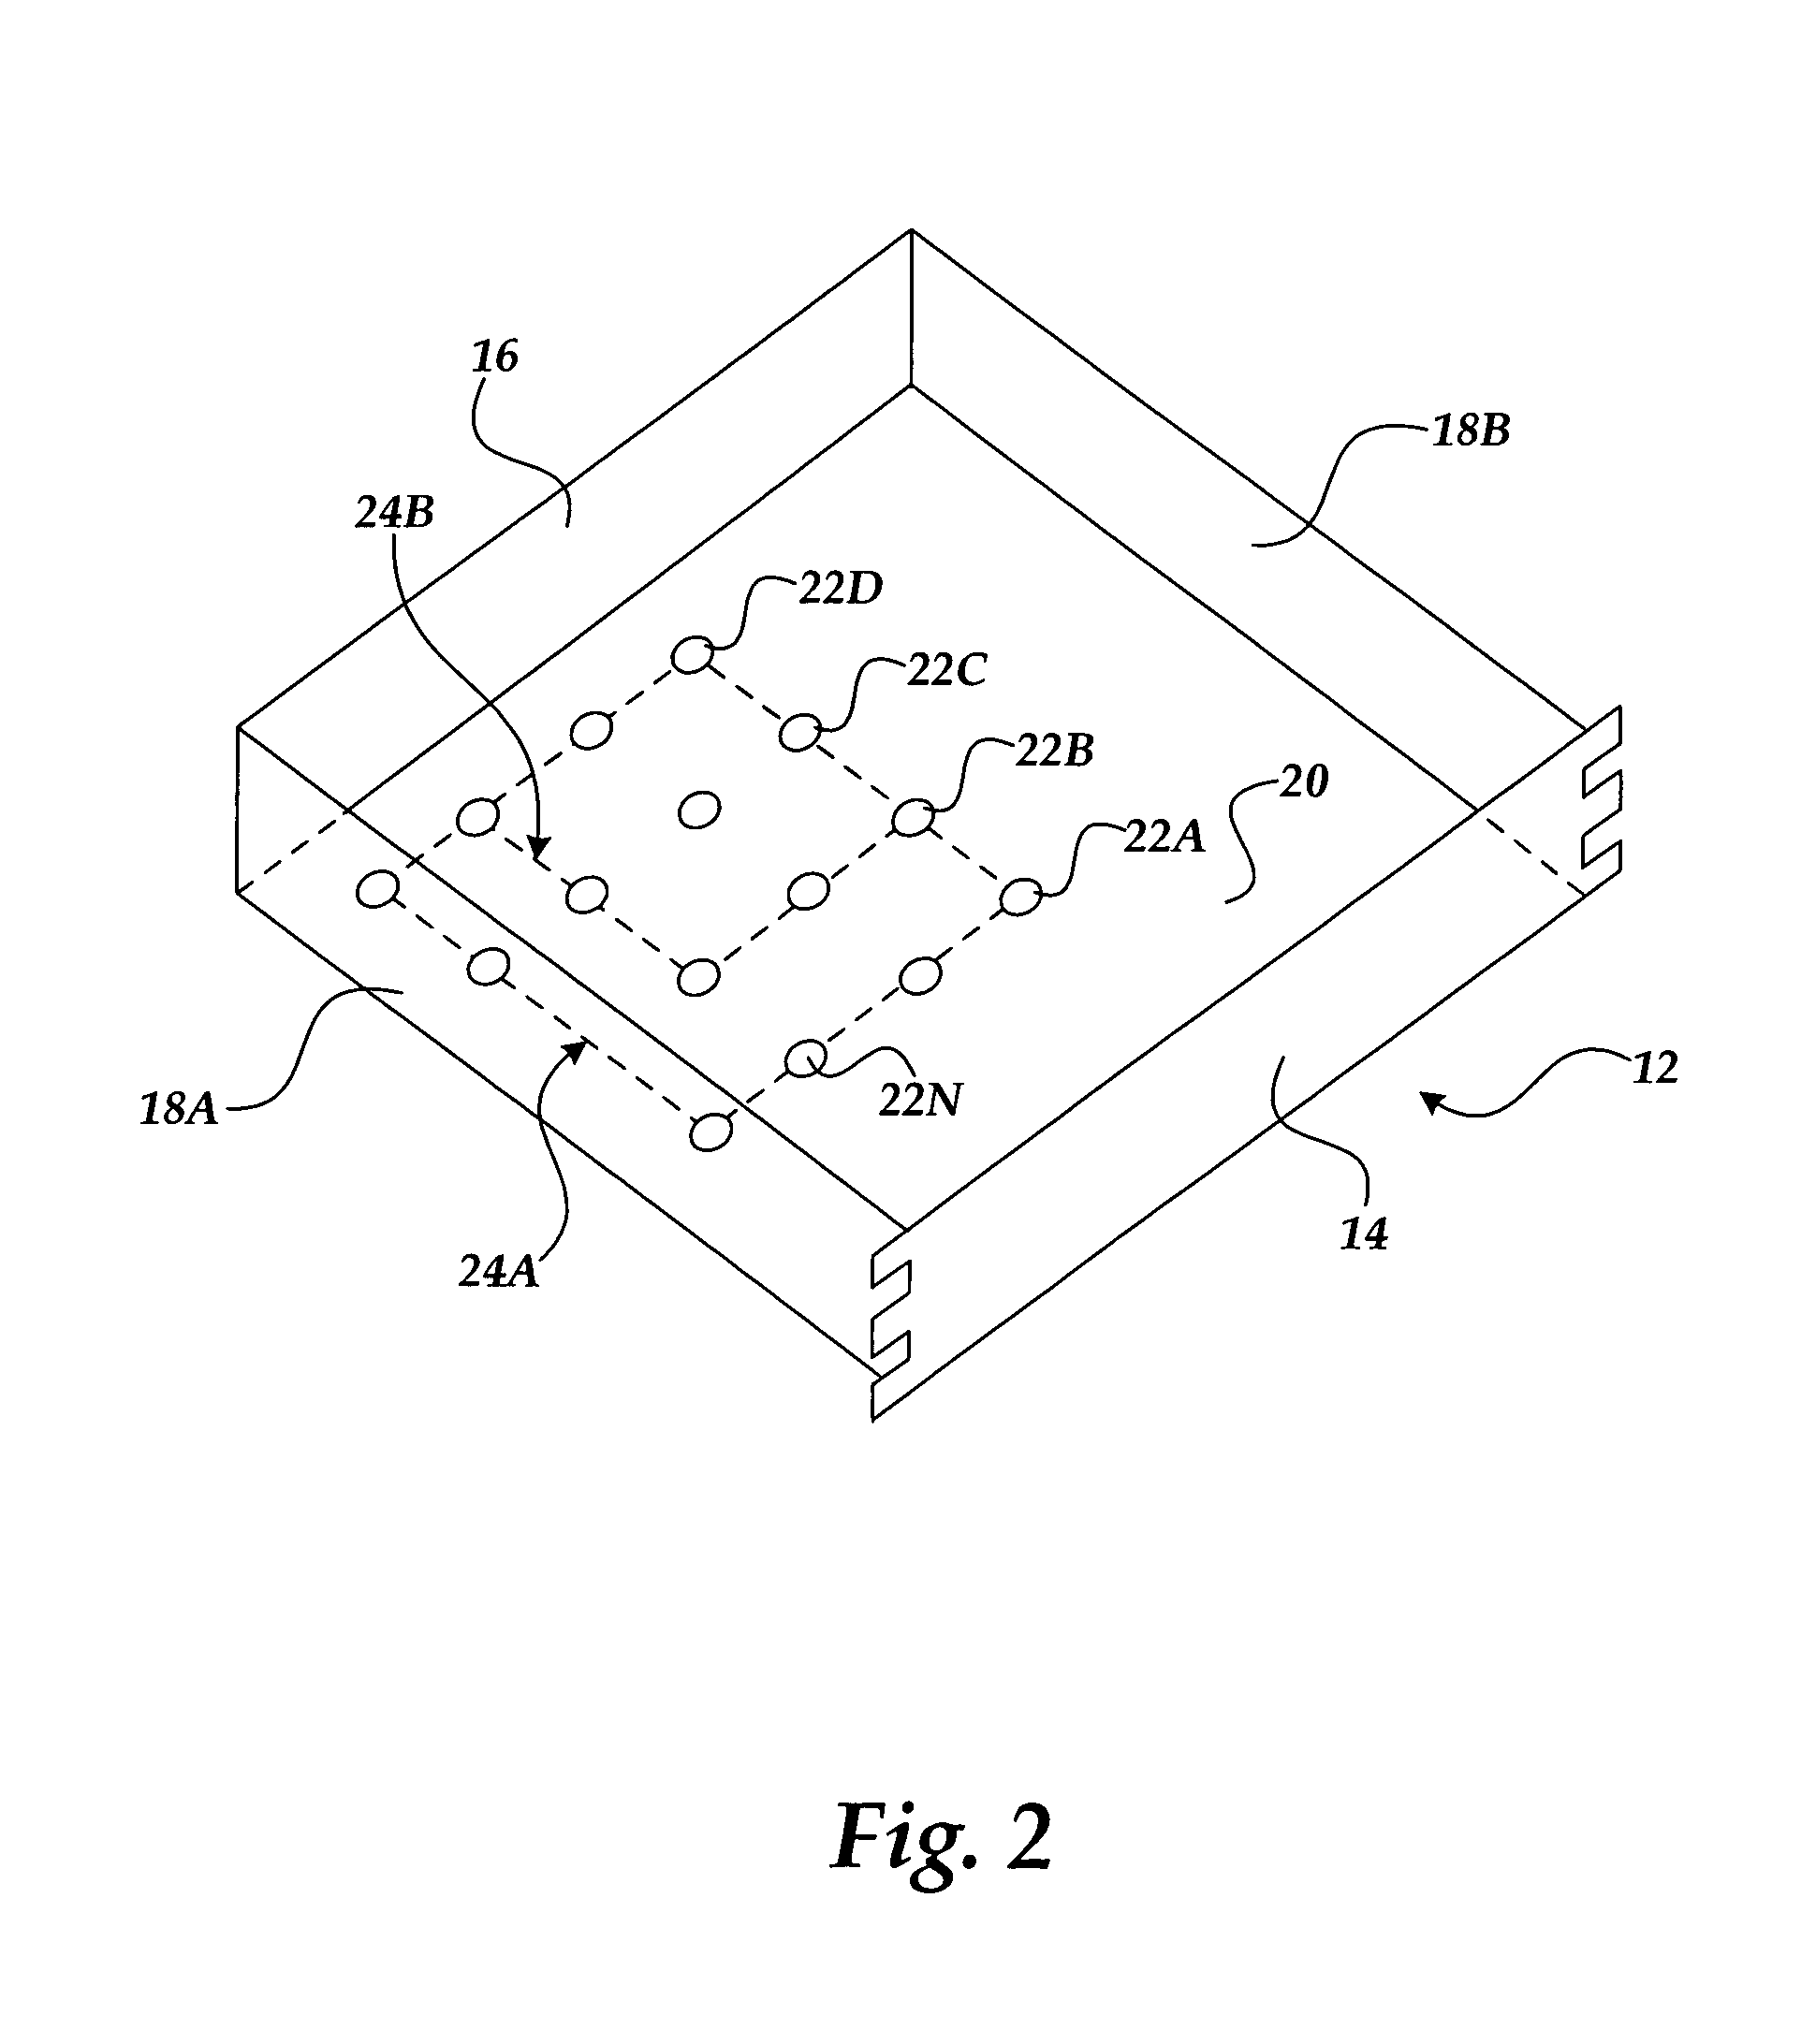 Apparatus for identifying and mounting printed circuit boards